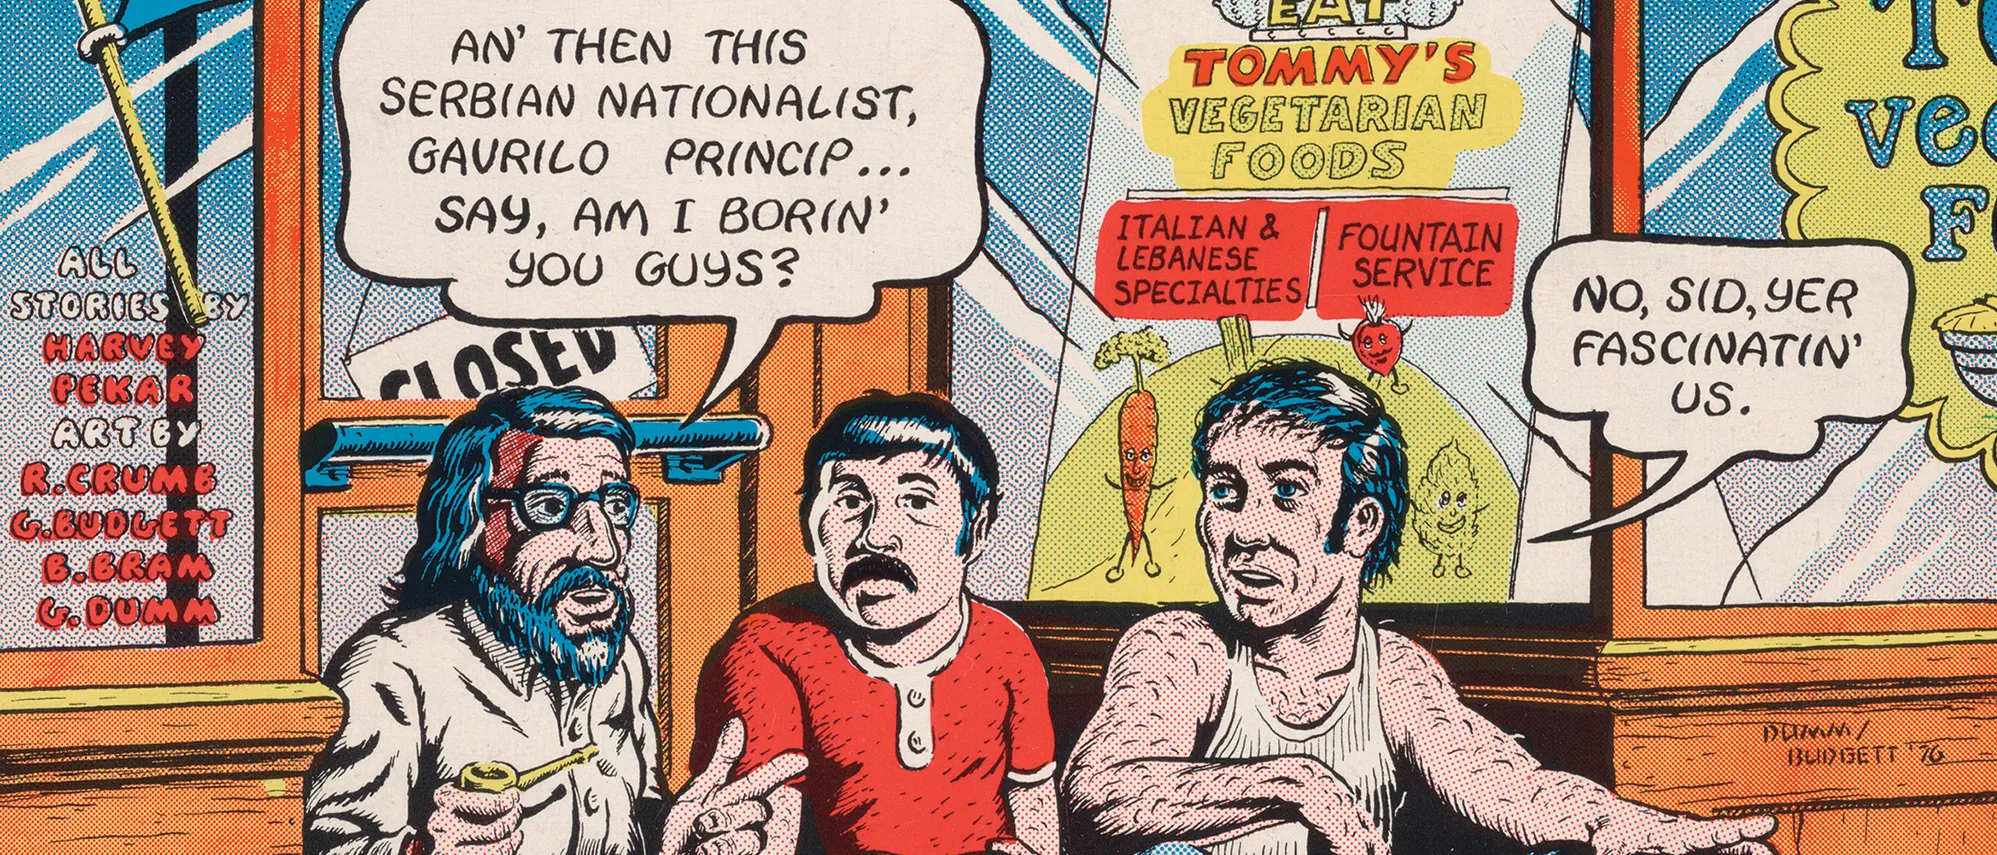 In part of a comic book cover, three men sit on the stoop of a store. A sign says, “Eat Tommy’s vegetarian foods.” A bearded man says, “An’ then this Serbian Nationalist, Gevrilo Princip… Say, am I boring you guys?” A man with black hair and a frown-shaped mustache seems to look at the viewer, and the third man, wearing an undershirt that shows his hairy arms and chest, says, “No, Sid, yer fascinating us.”